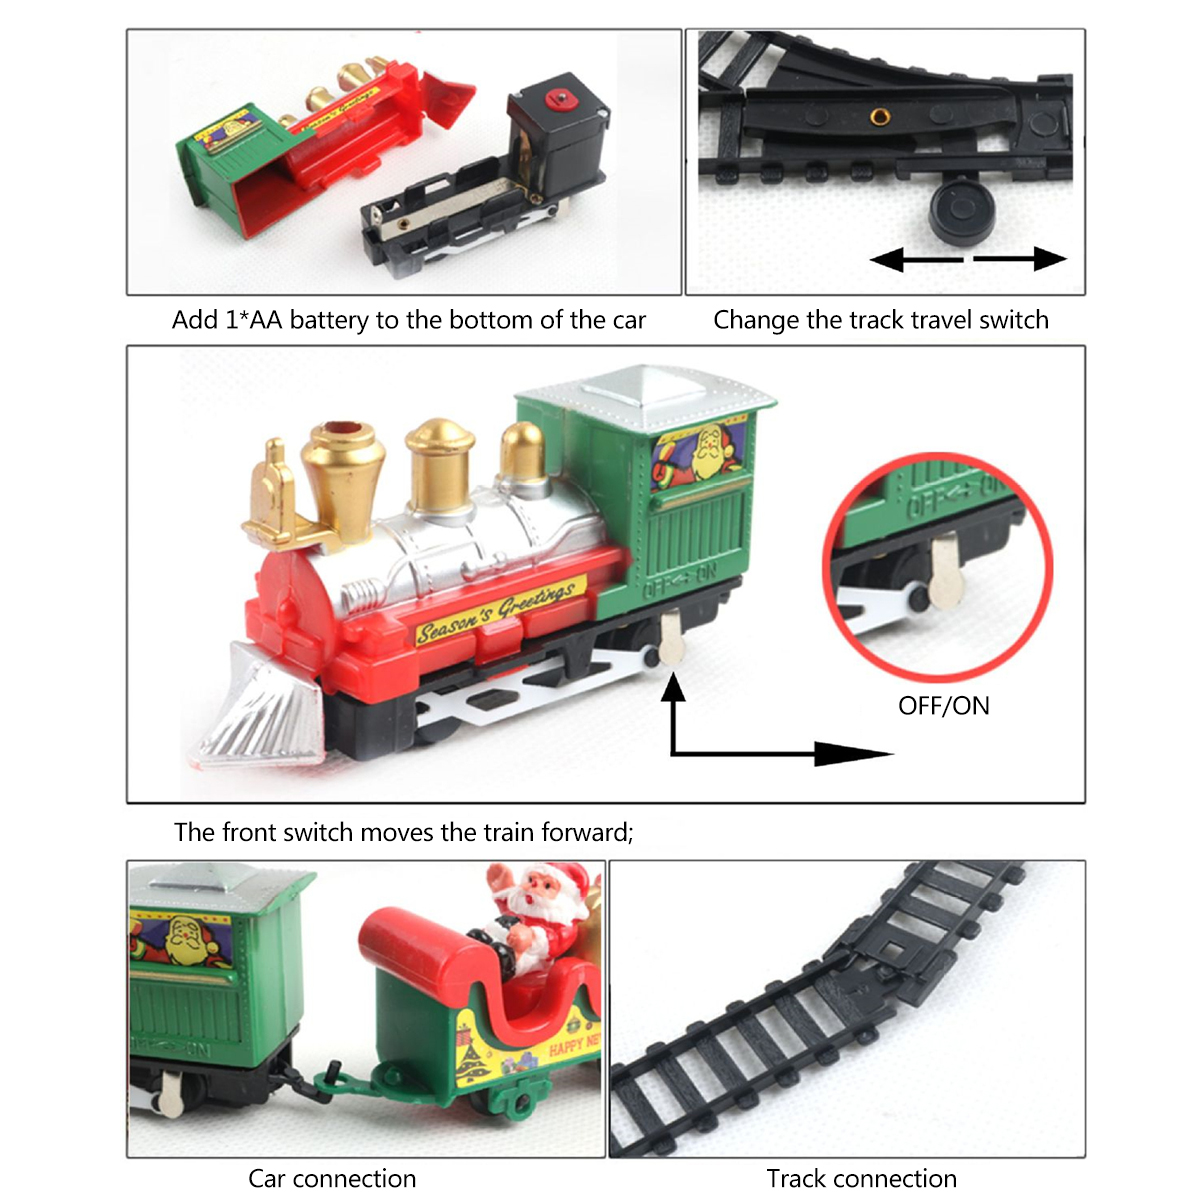 Mini-Electric-ABS-DIY-Assembly-Realistic-Front-Rail-Train-Track-Play-Fun-Model-Toy-for-Kids-Christma-1766568-5